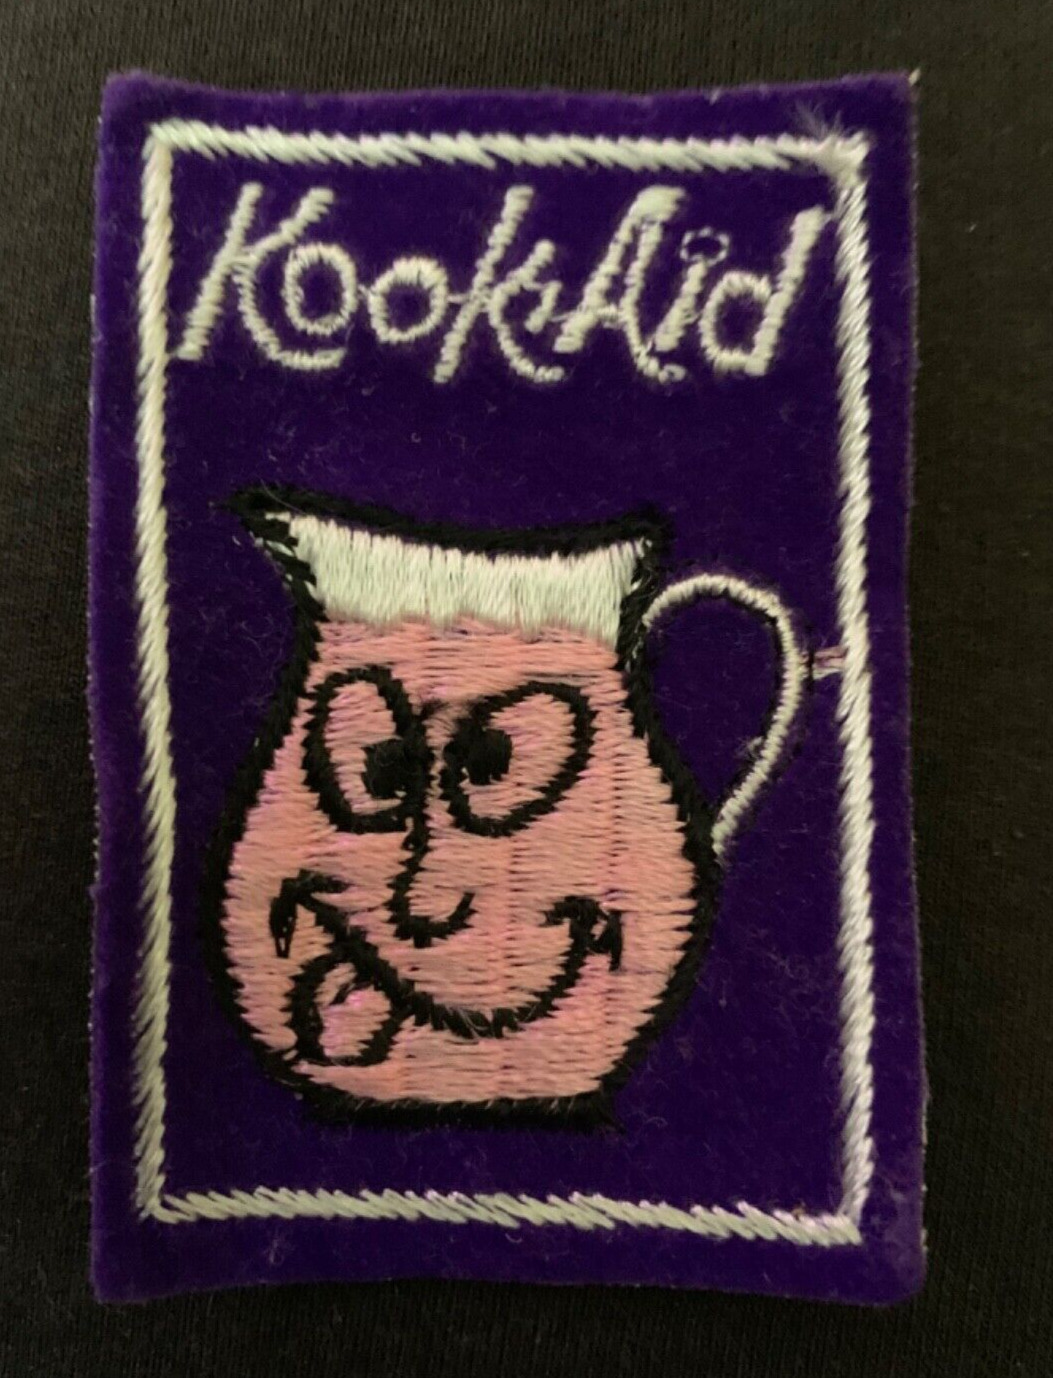 Vintage 1974 Wacky Packages Kool Aid Pitcher Patch Parody NOS